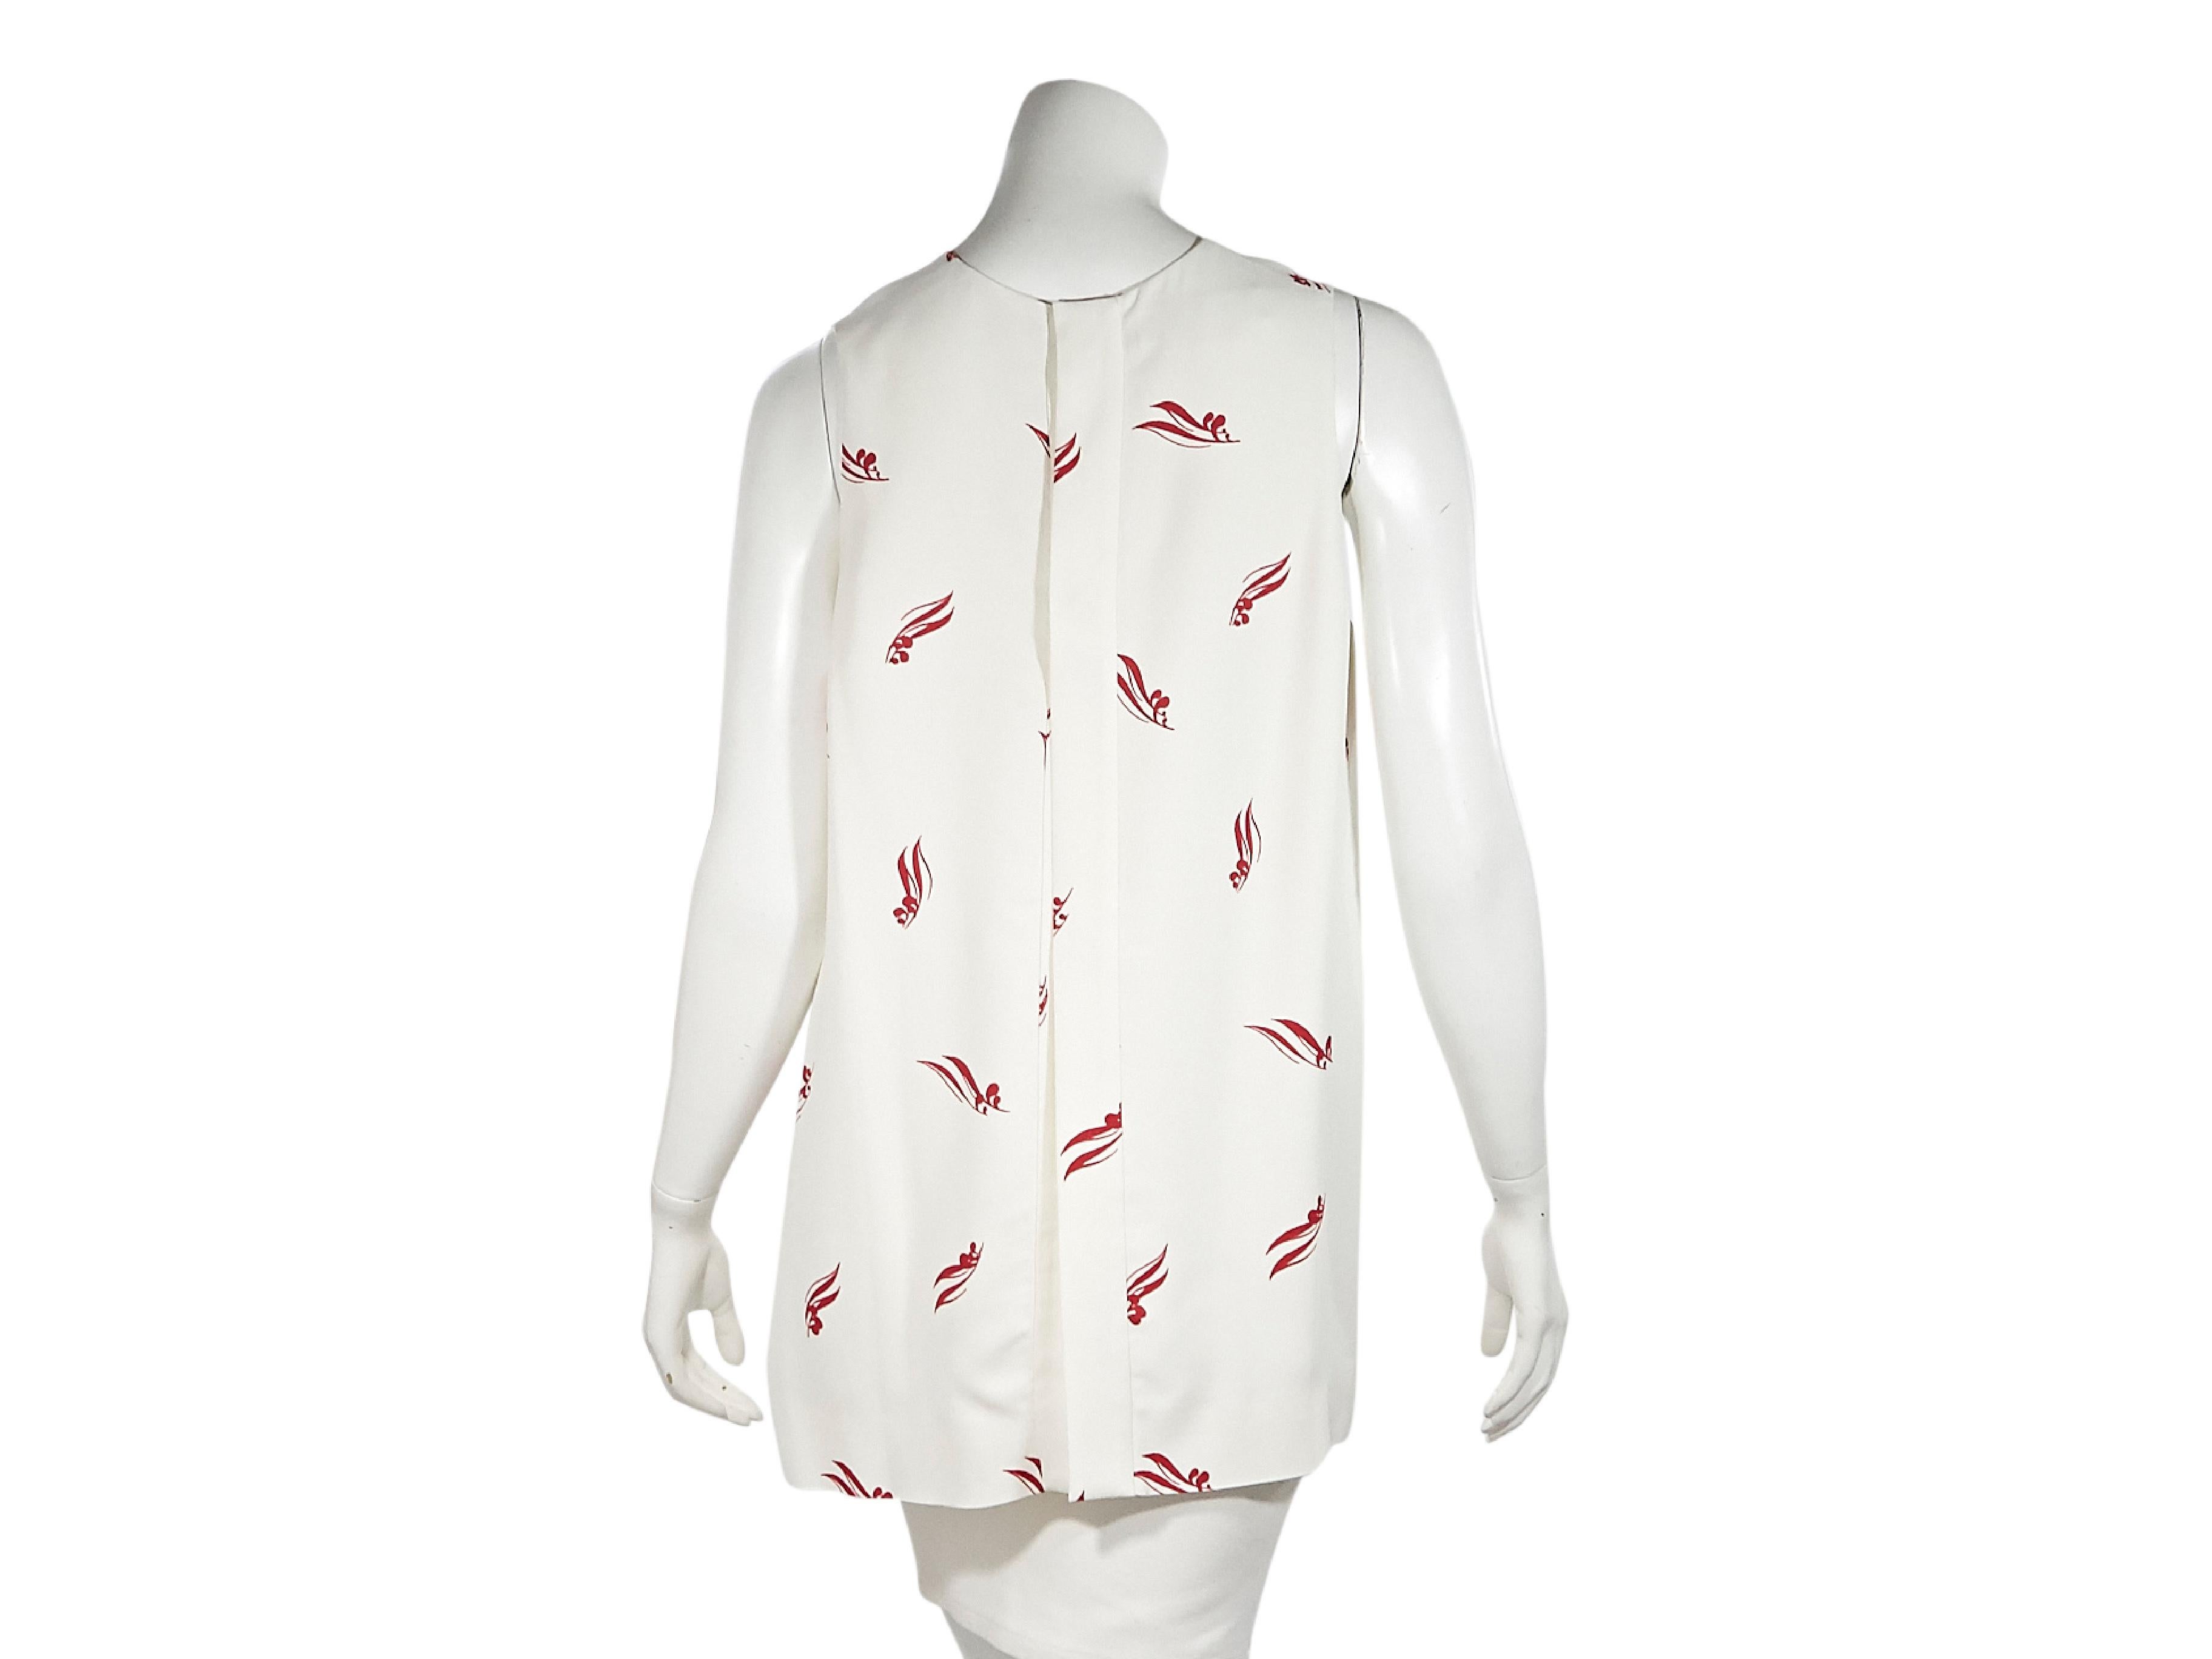 Product details:  White and red printed long top by Marni.  Scoopneck.  Sleeveless.  Concealed back snap closure.  40